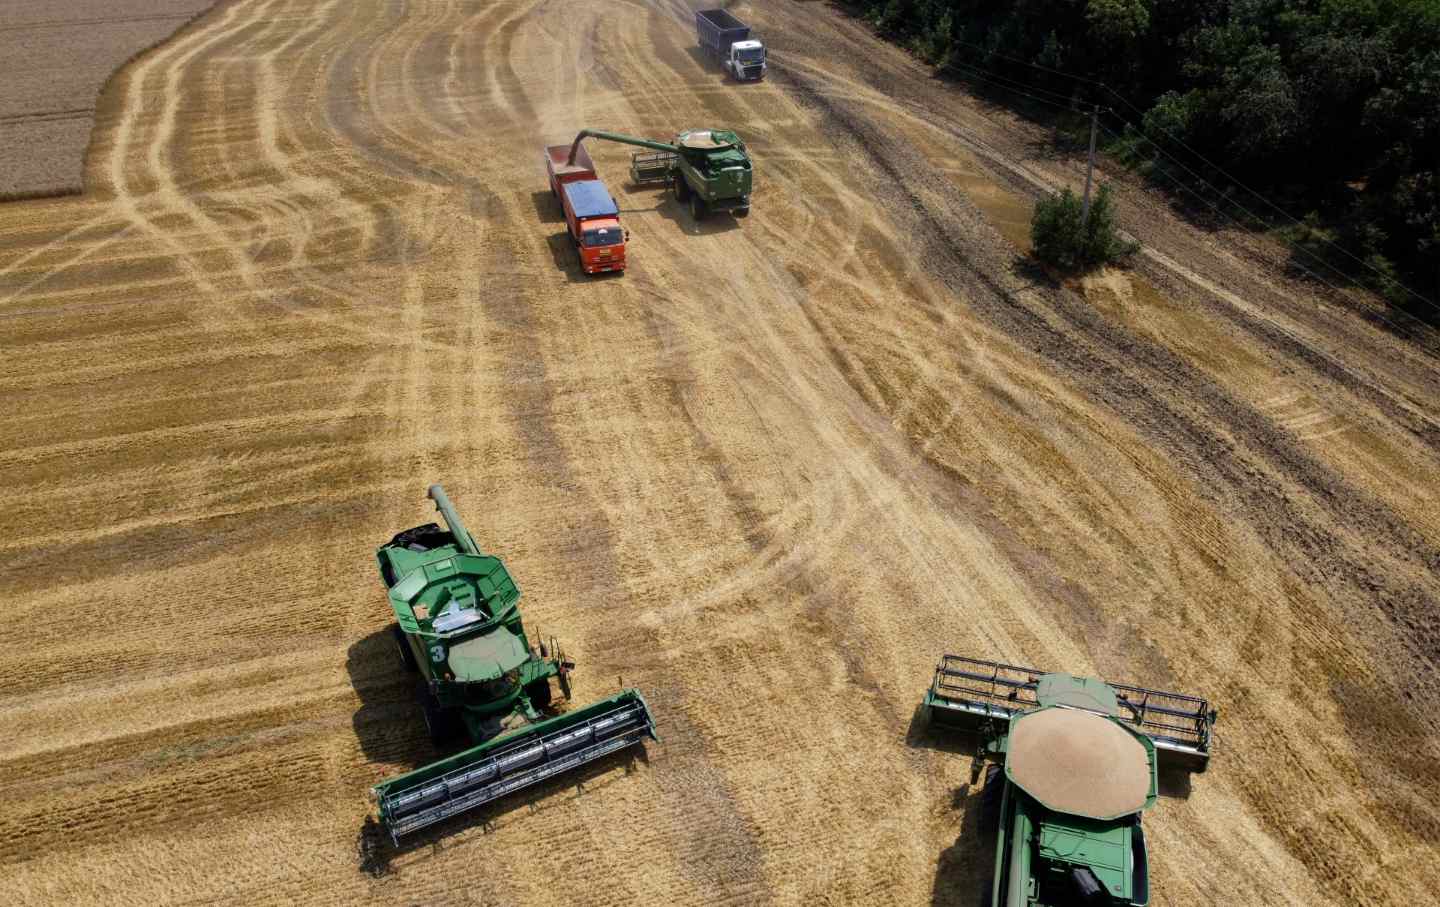 Farm equipment seen from above a harvested field.